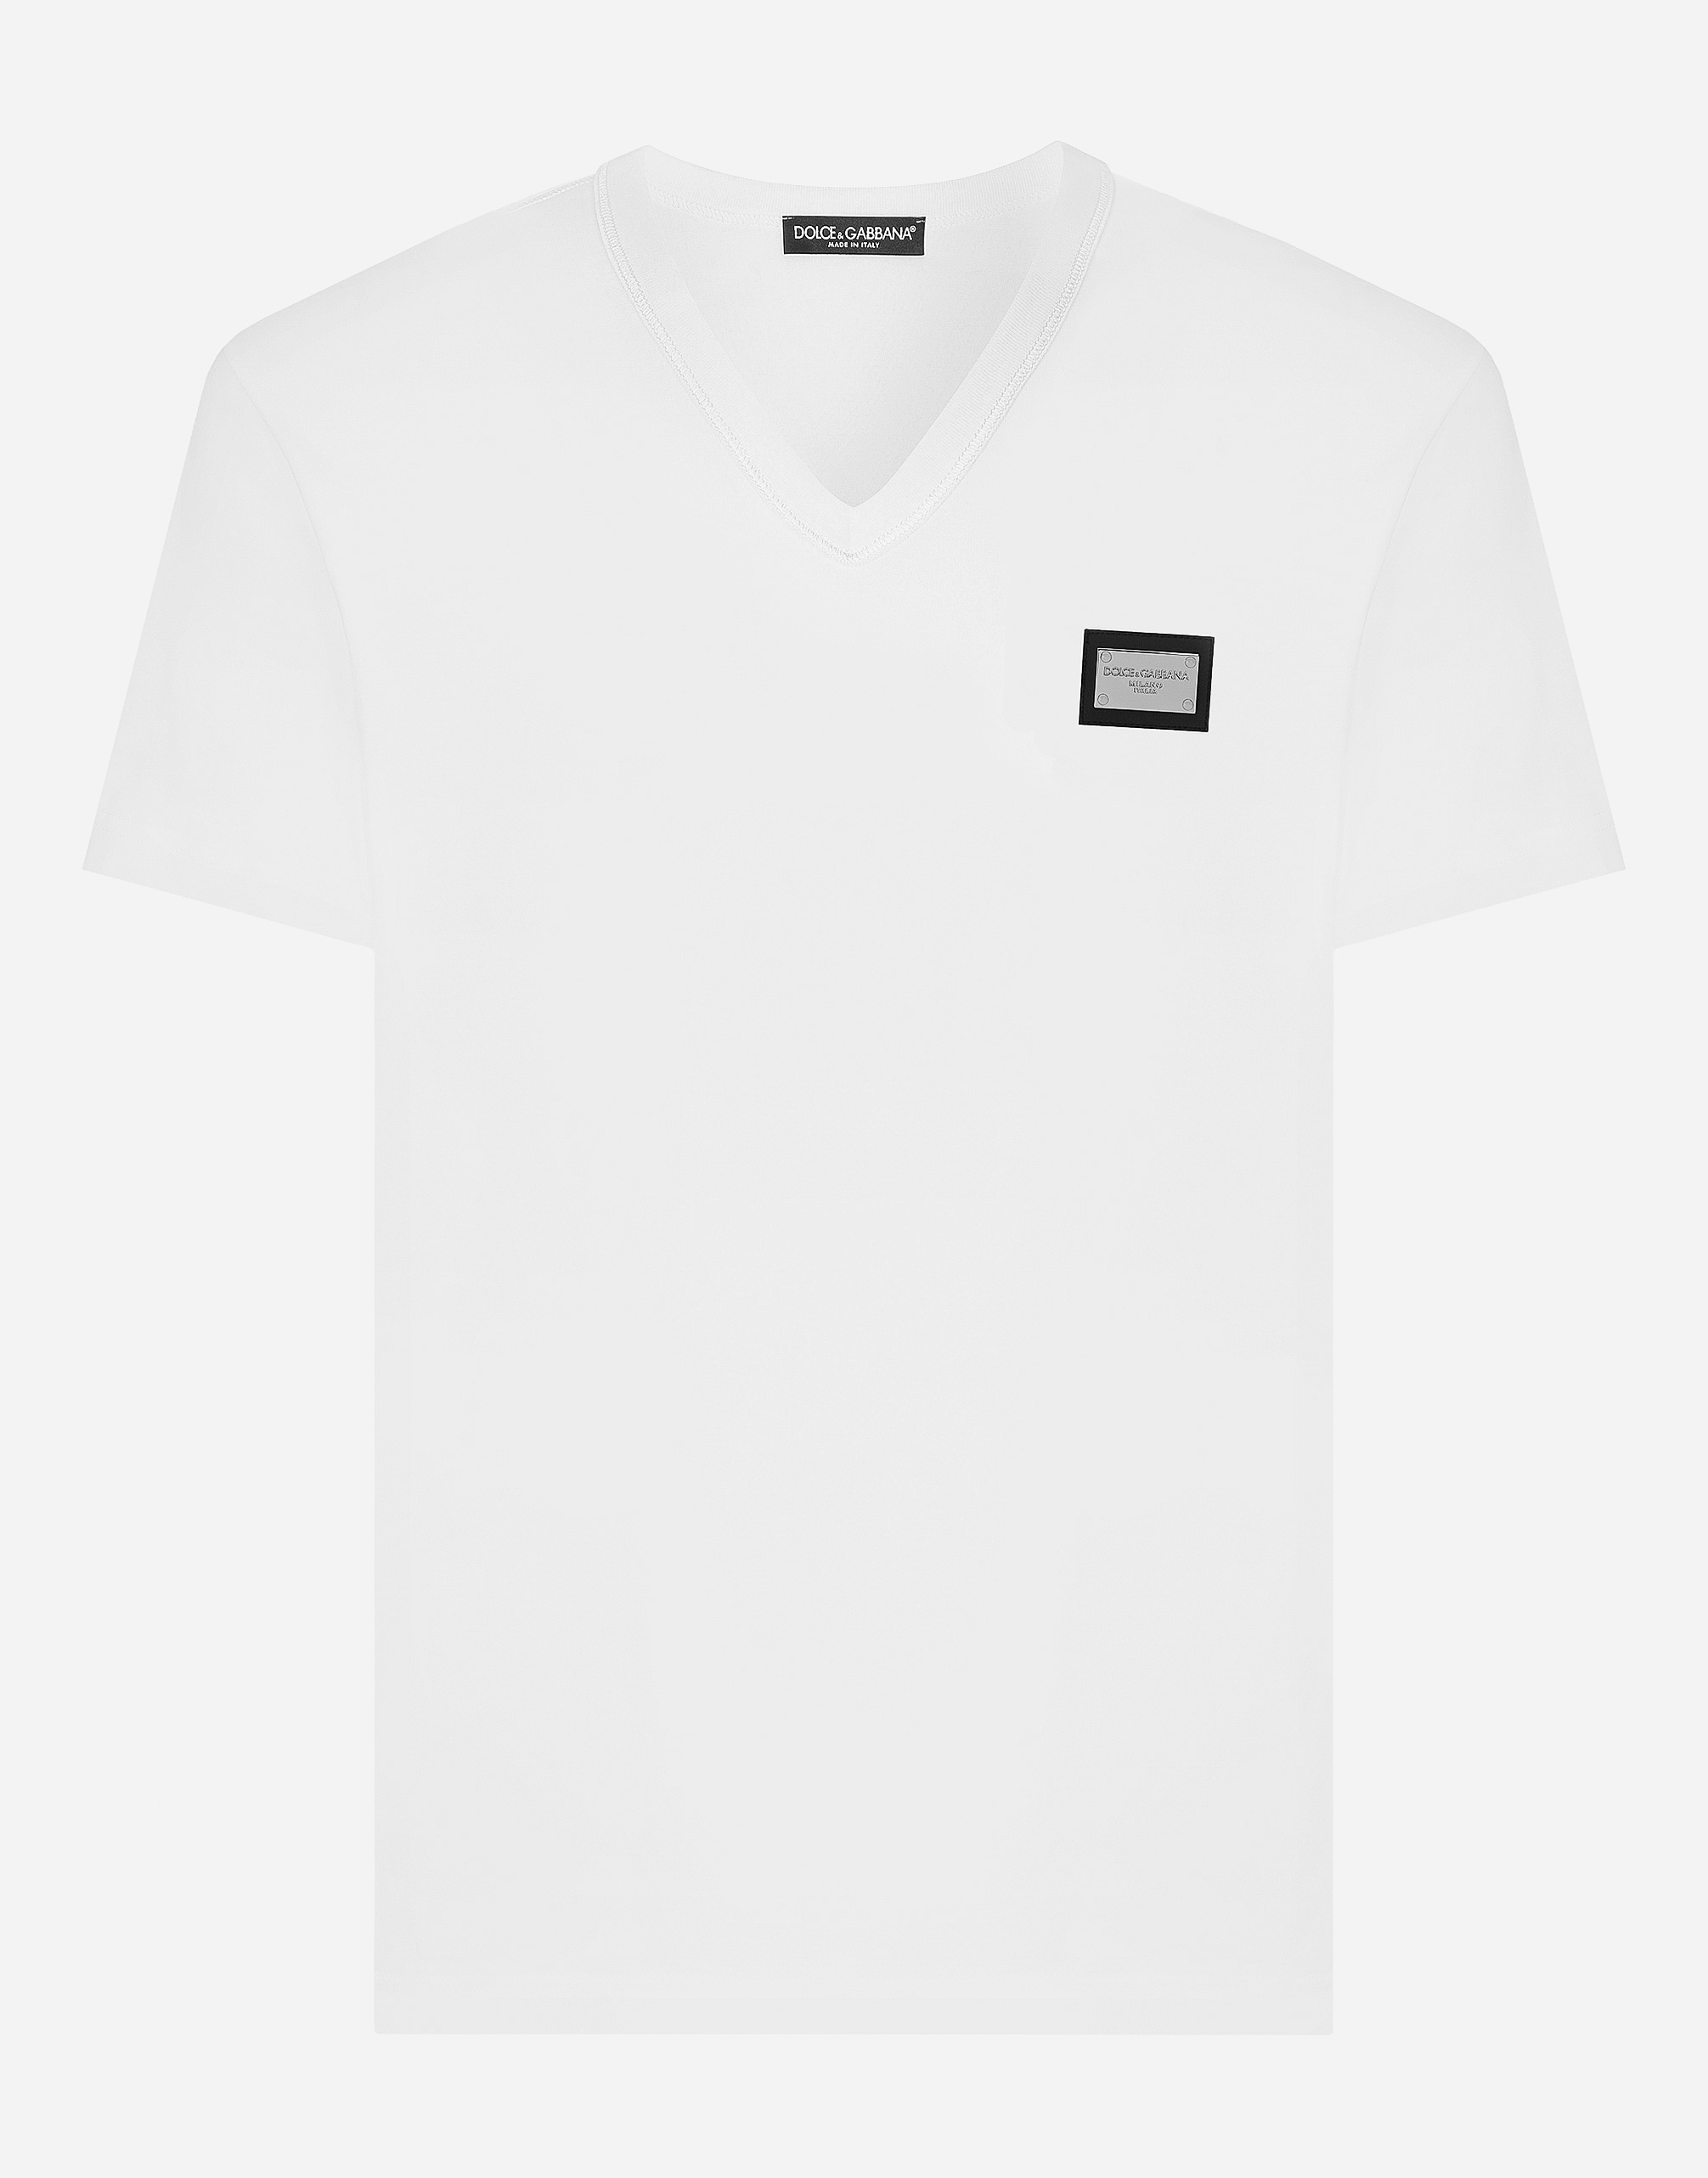 Cotton V-neck T-shirt with branded tag in White